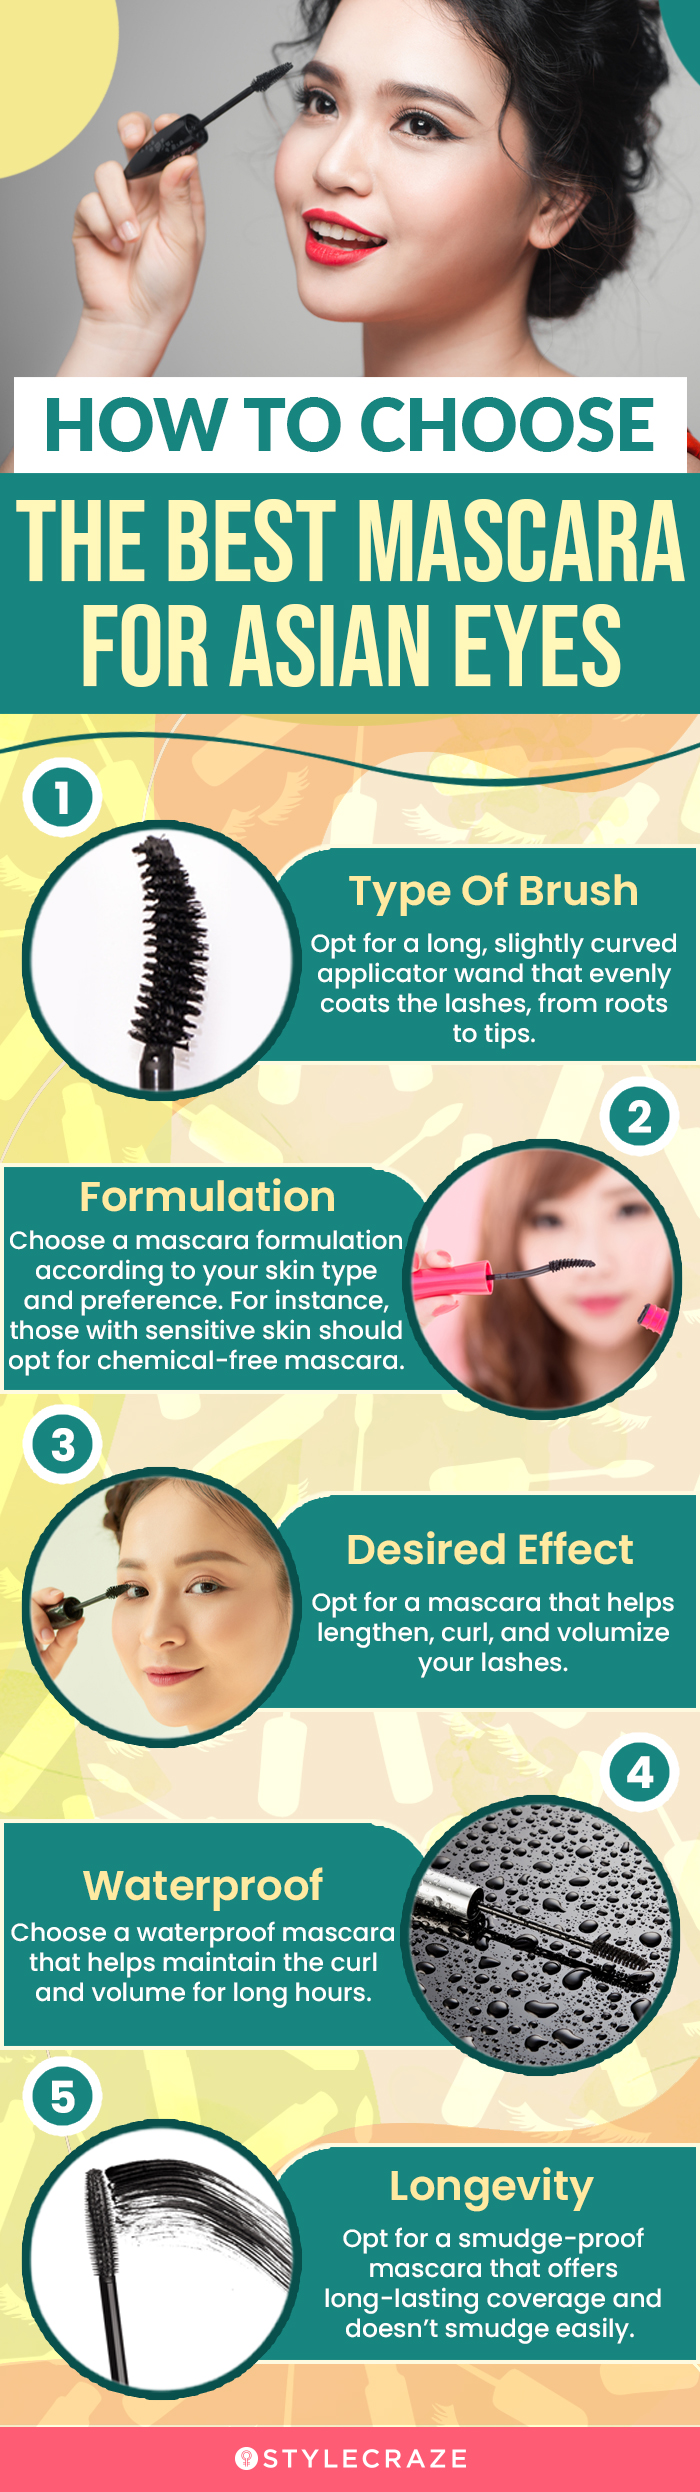 How To Choose The Best Mascara For Asian Eyes (infographic)